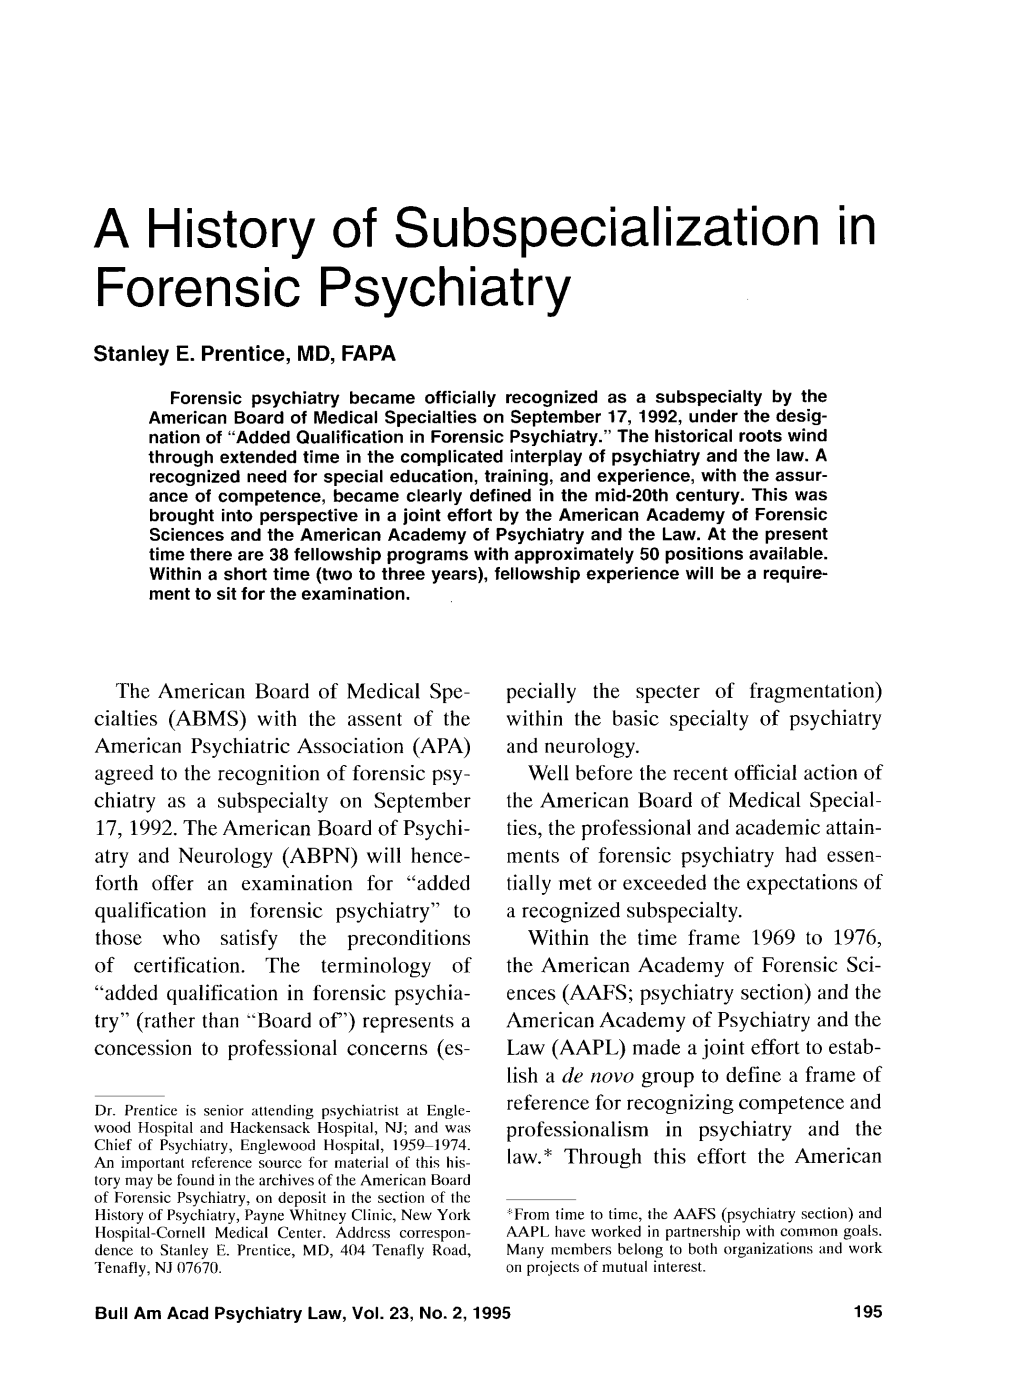 A History of Subspecialization in Forensic Psychiatry